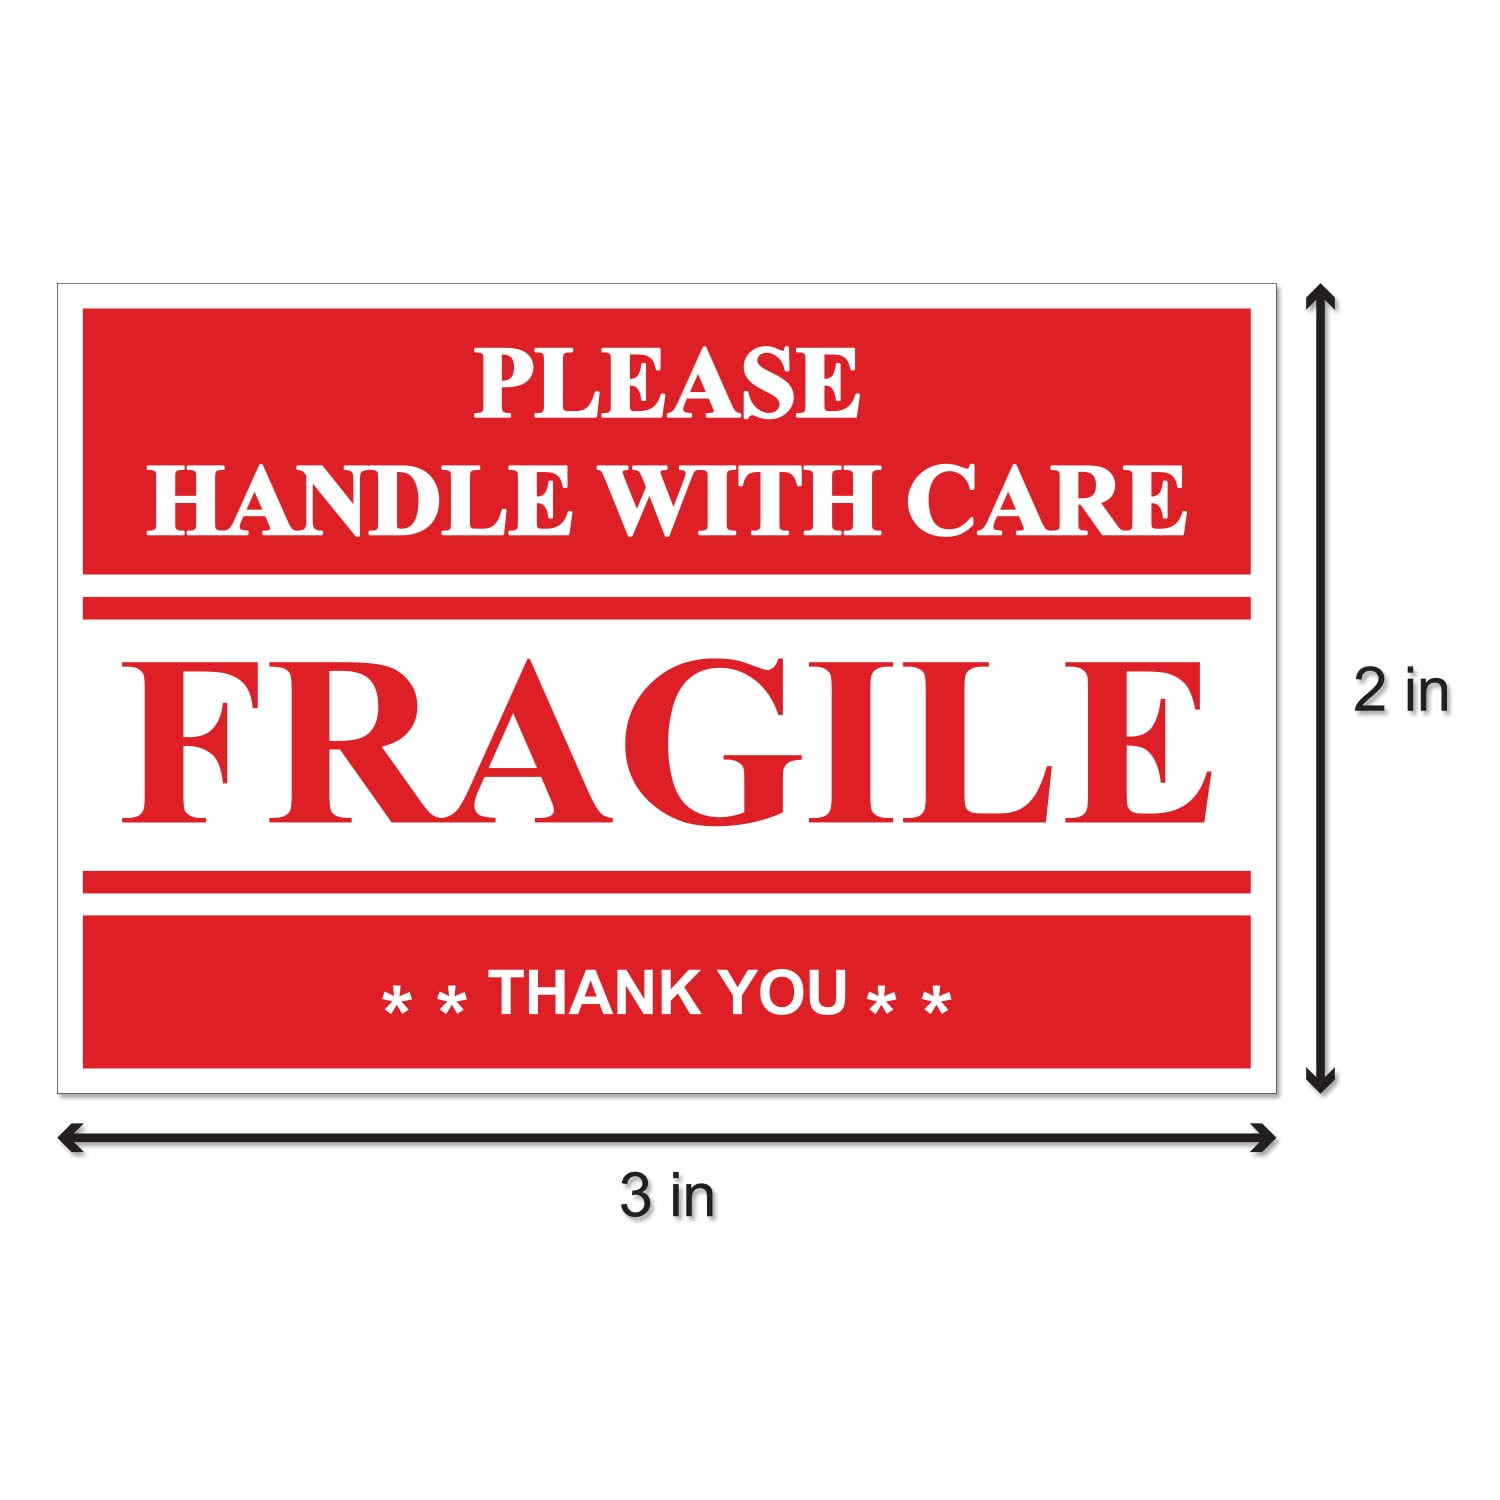 Fragile Please Handle With Care Do Not Drop Label Stickers 2" X 3" 1000 Labels 